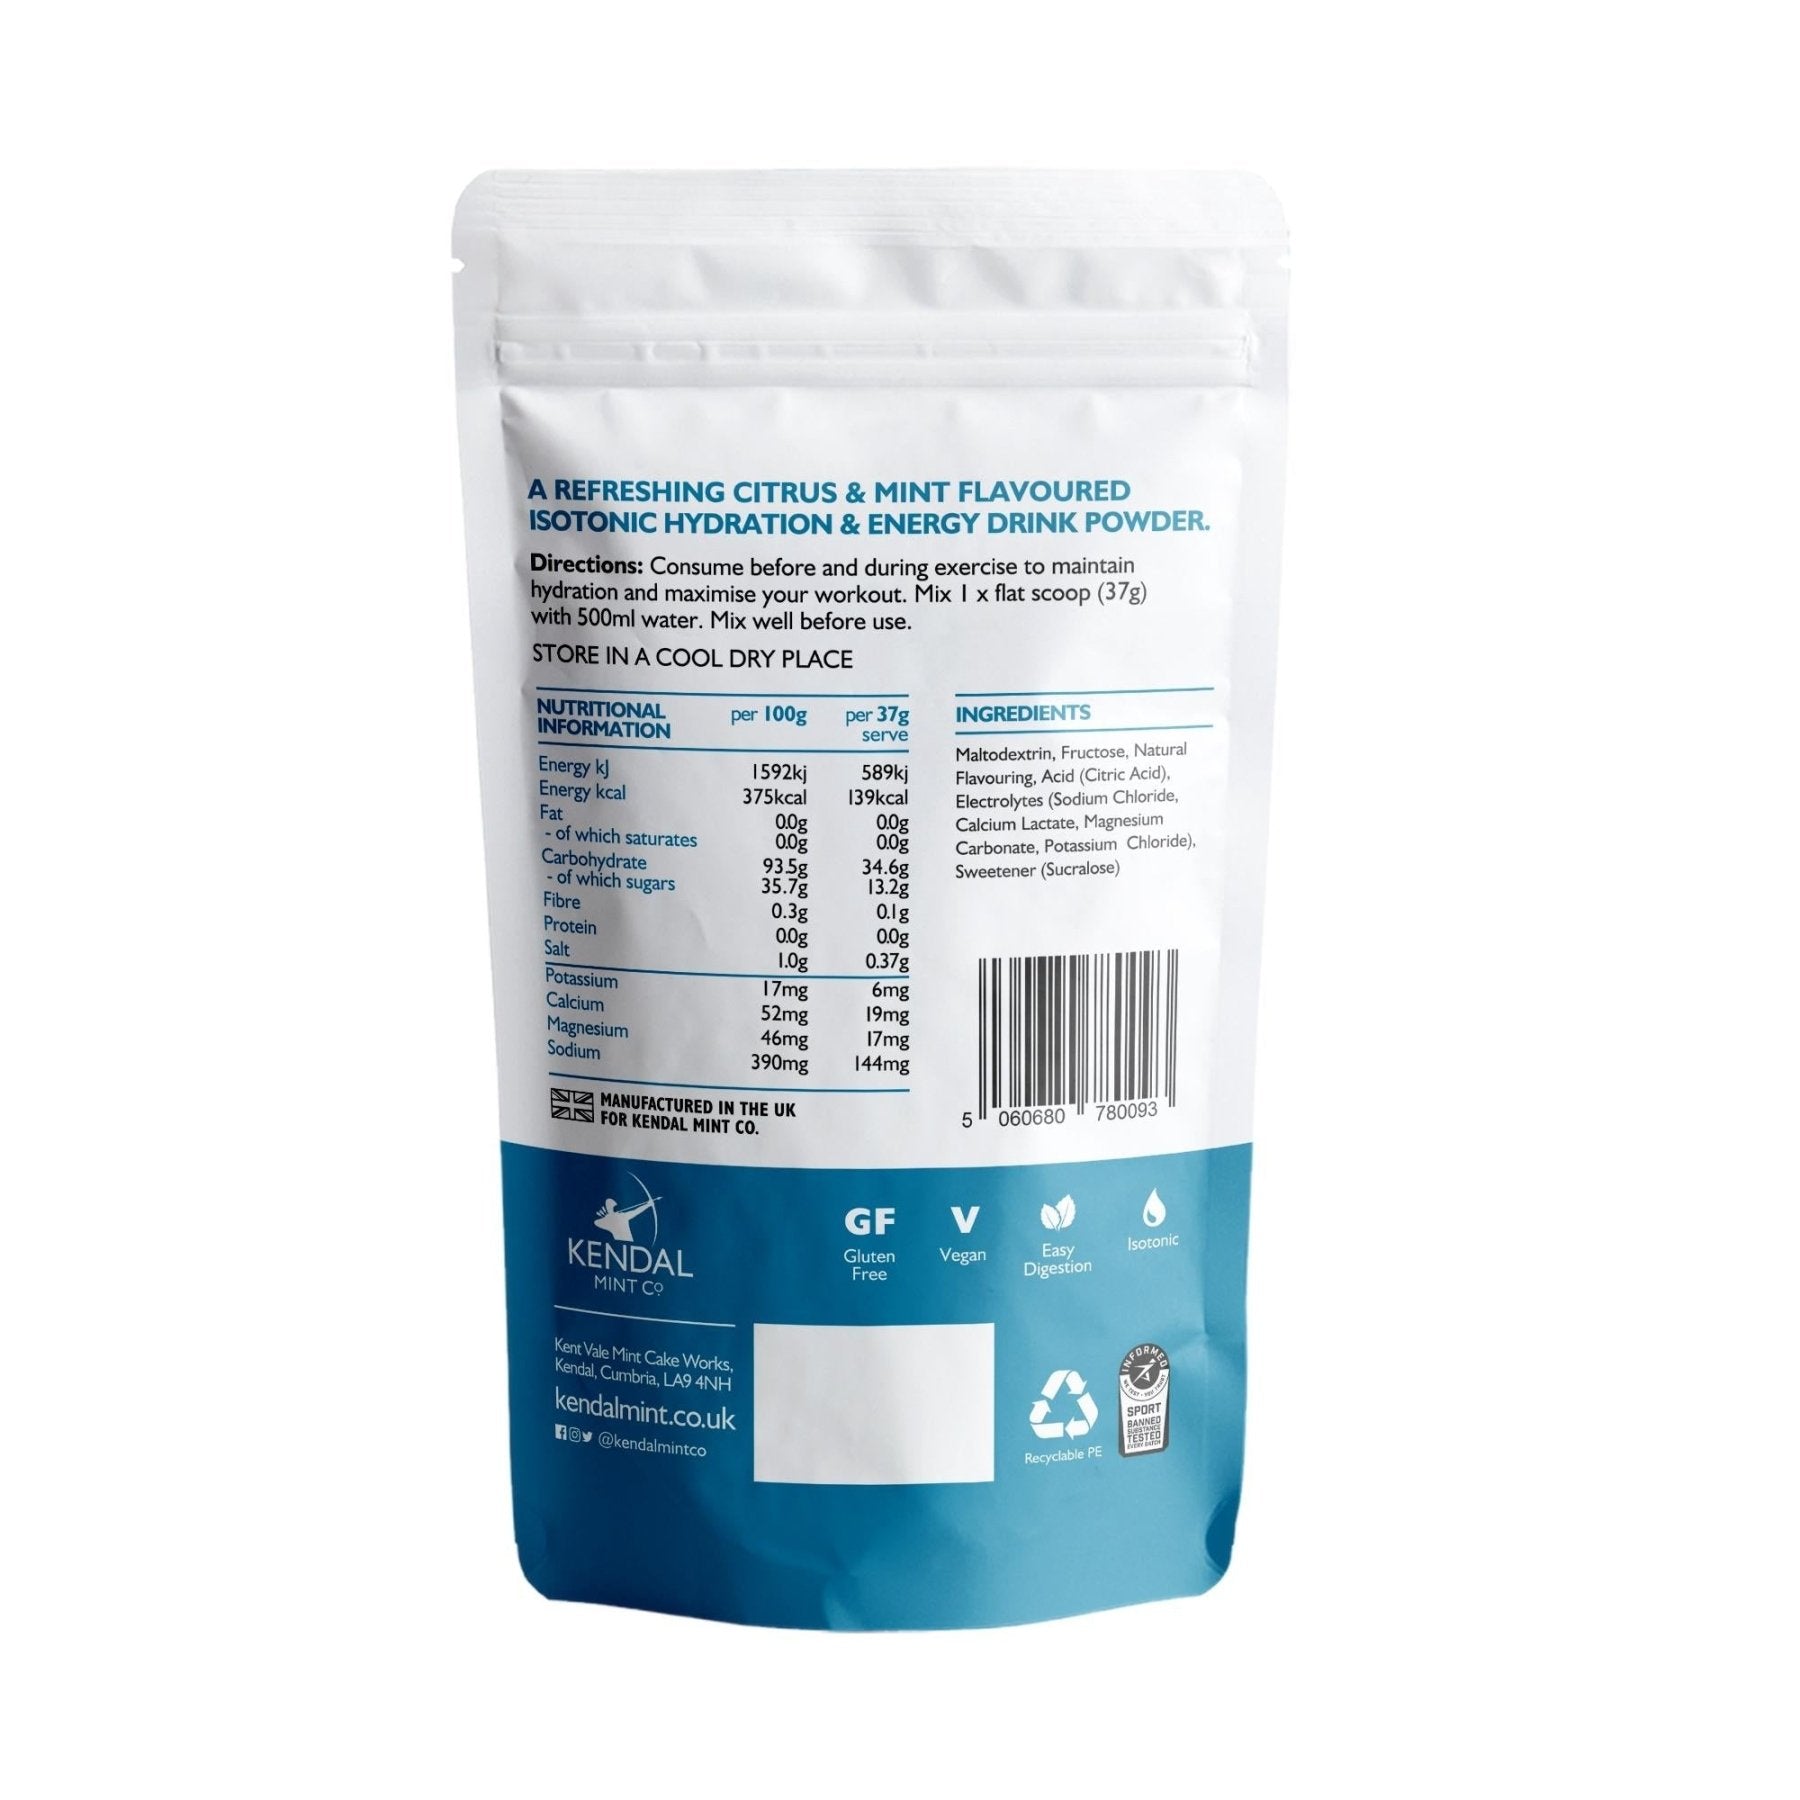 KMC ISO MIX Isotonic Hydration Recyclable Pouch 1kg - 27 Serves - KMC ISO MIX - Kendal Mint Co® - 1kg/ 27 Serves